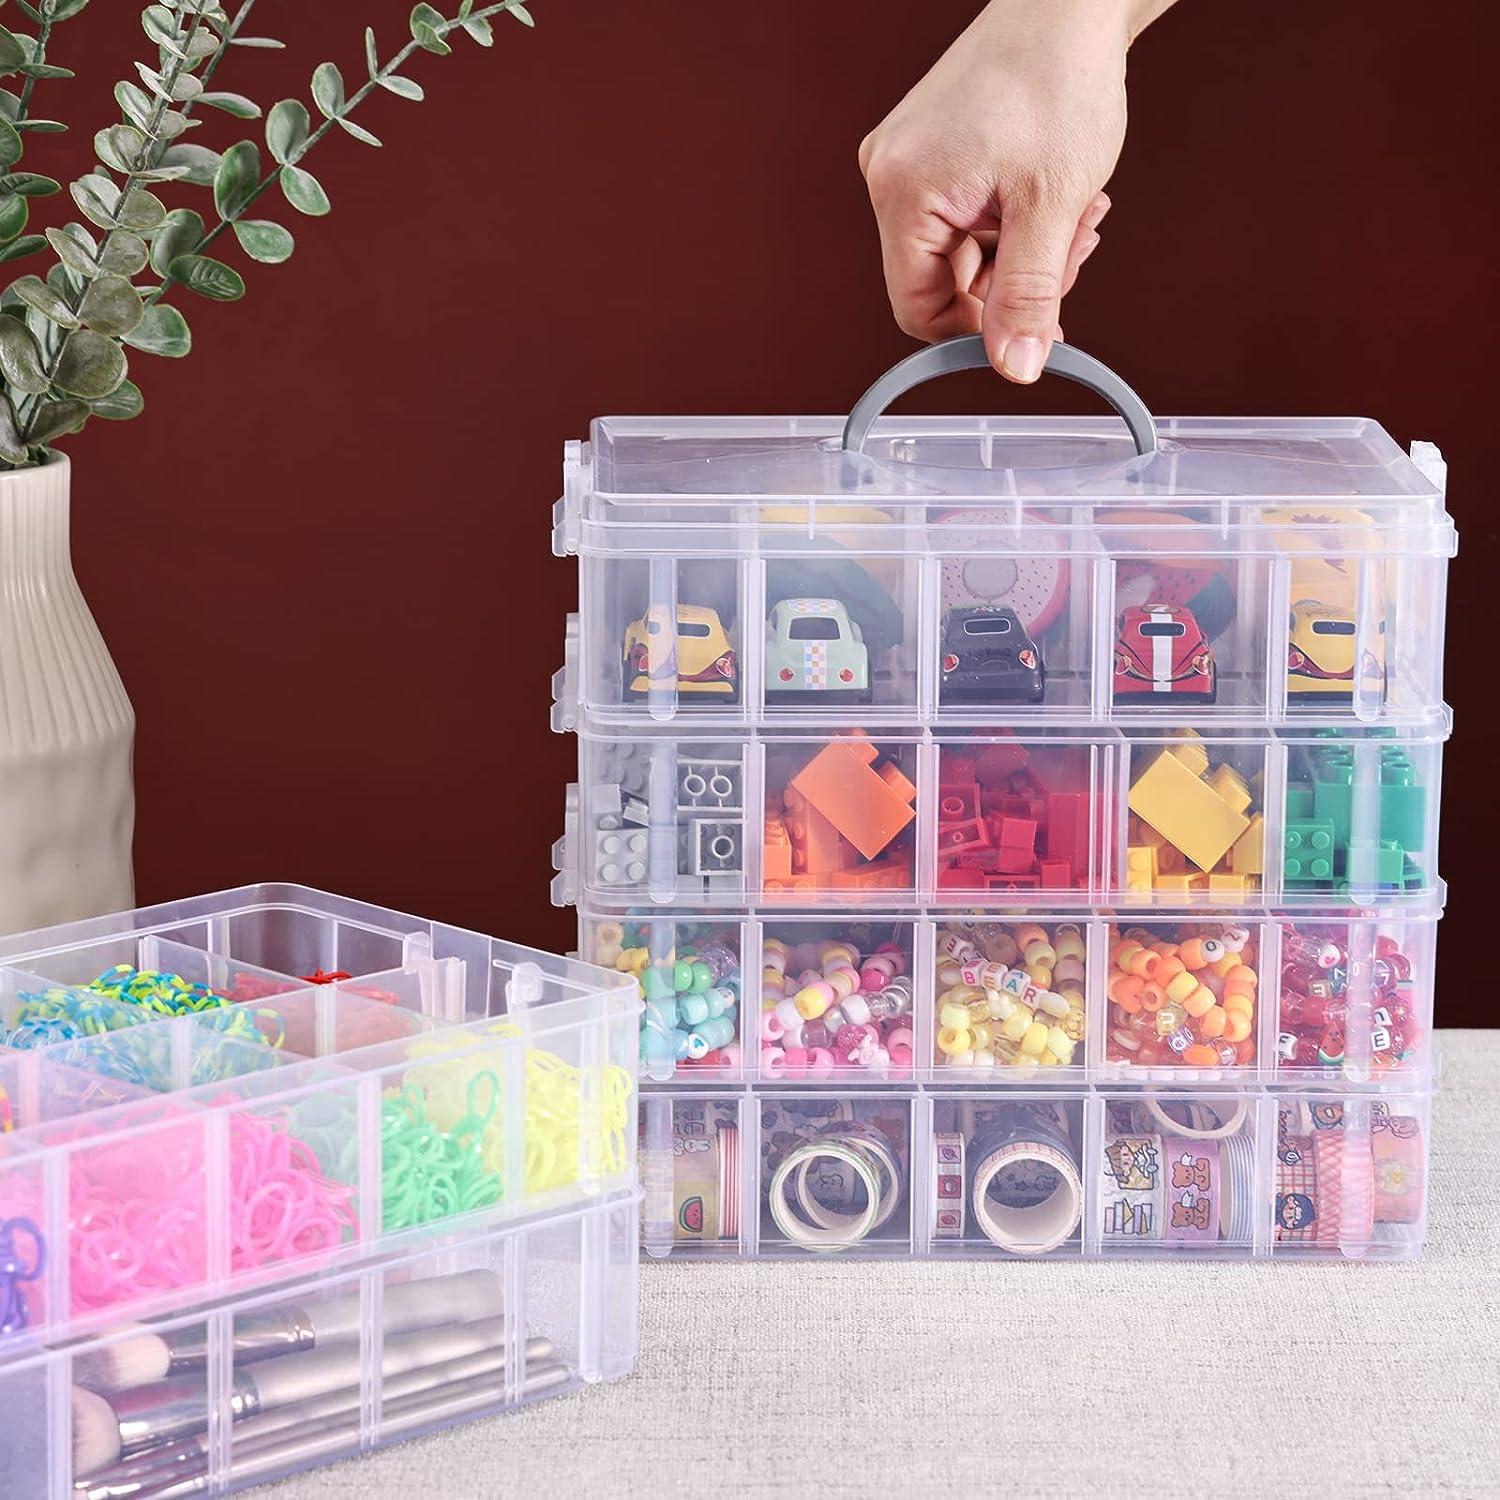 3 Tier Stackable Storage Containers with Adjustable Compartments for Beads,  Sewing Accessories, Arts and Crafts Supplies (6 x 6 x 5 In)